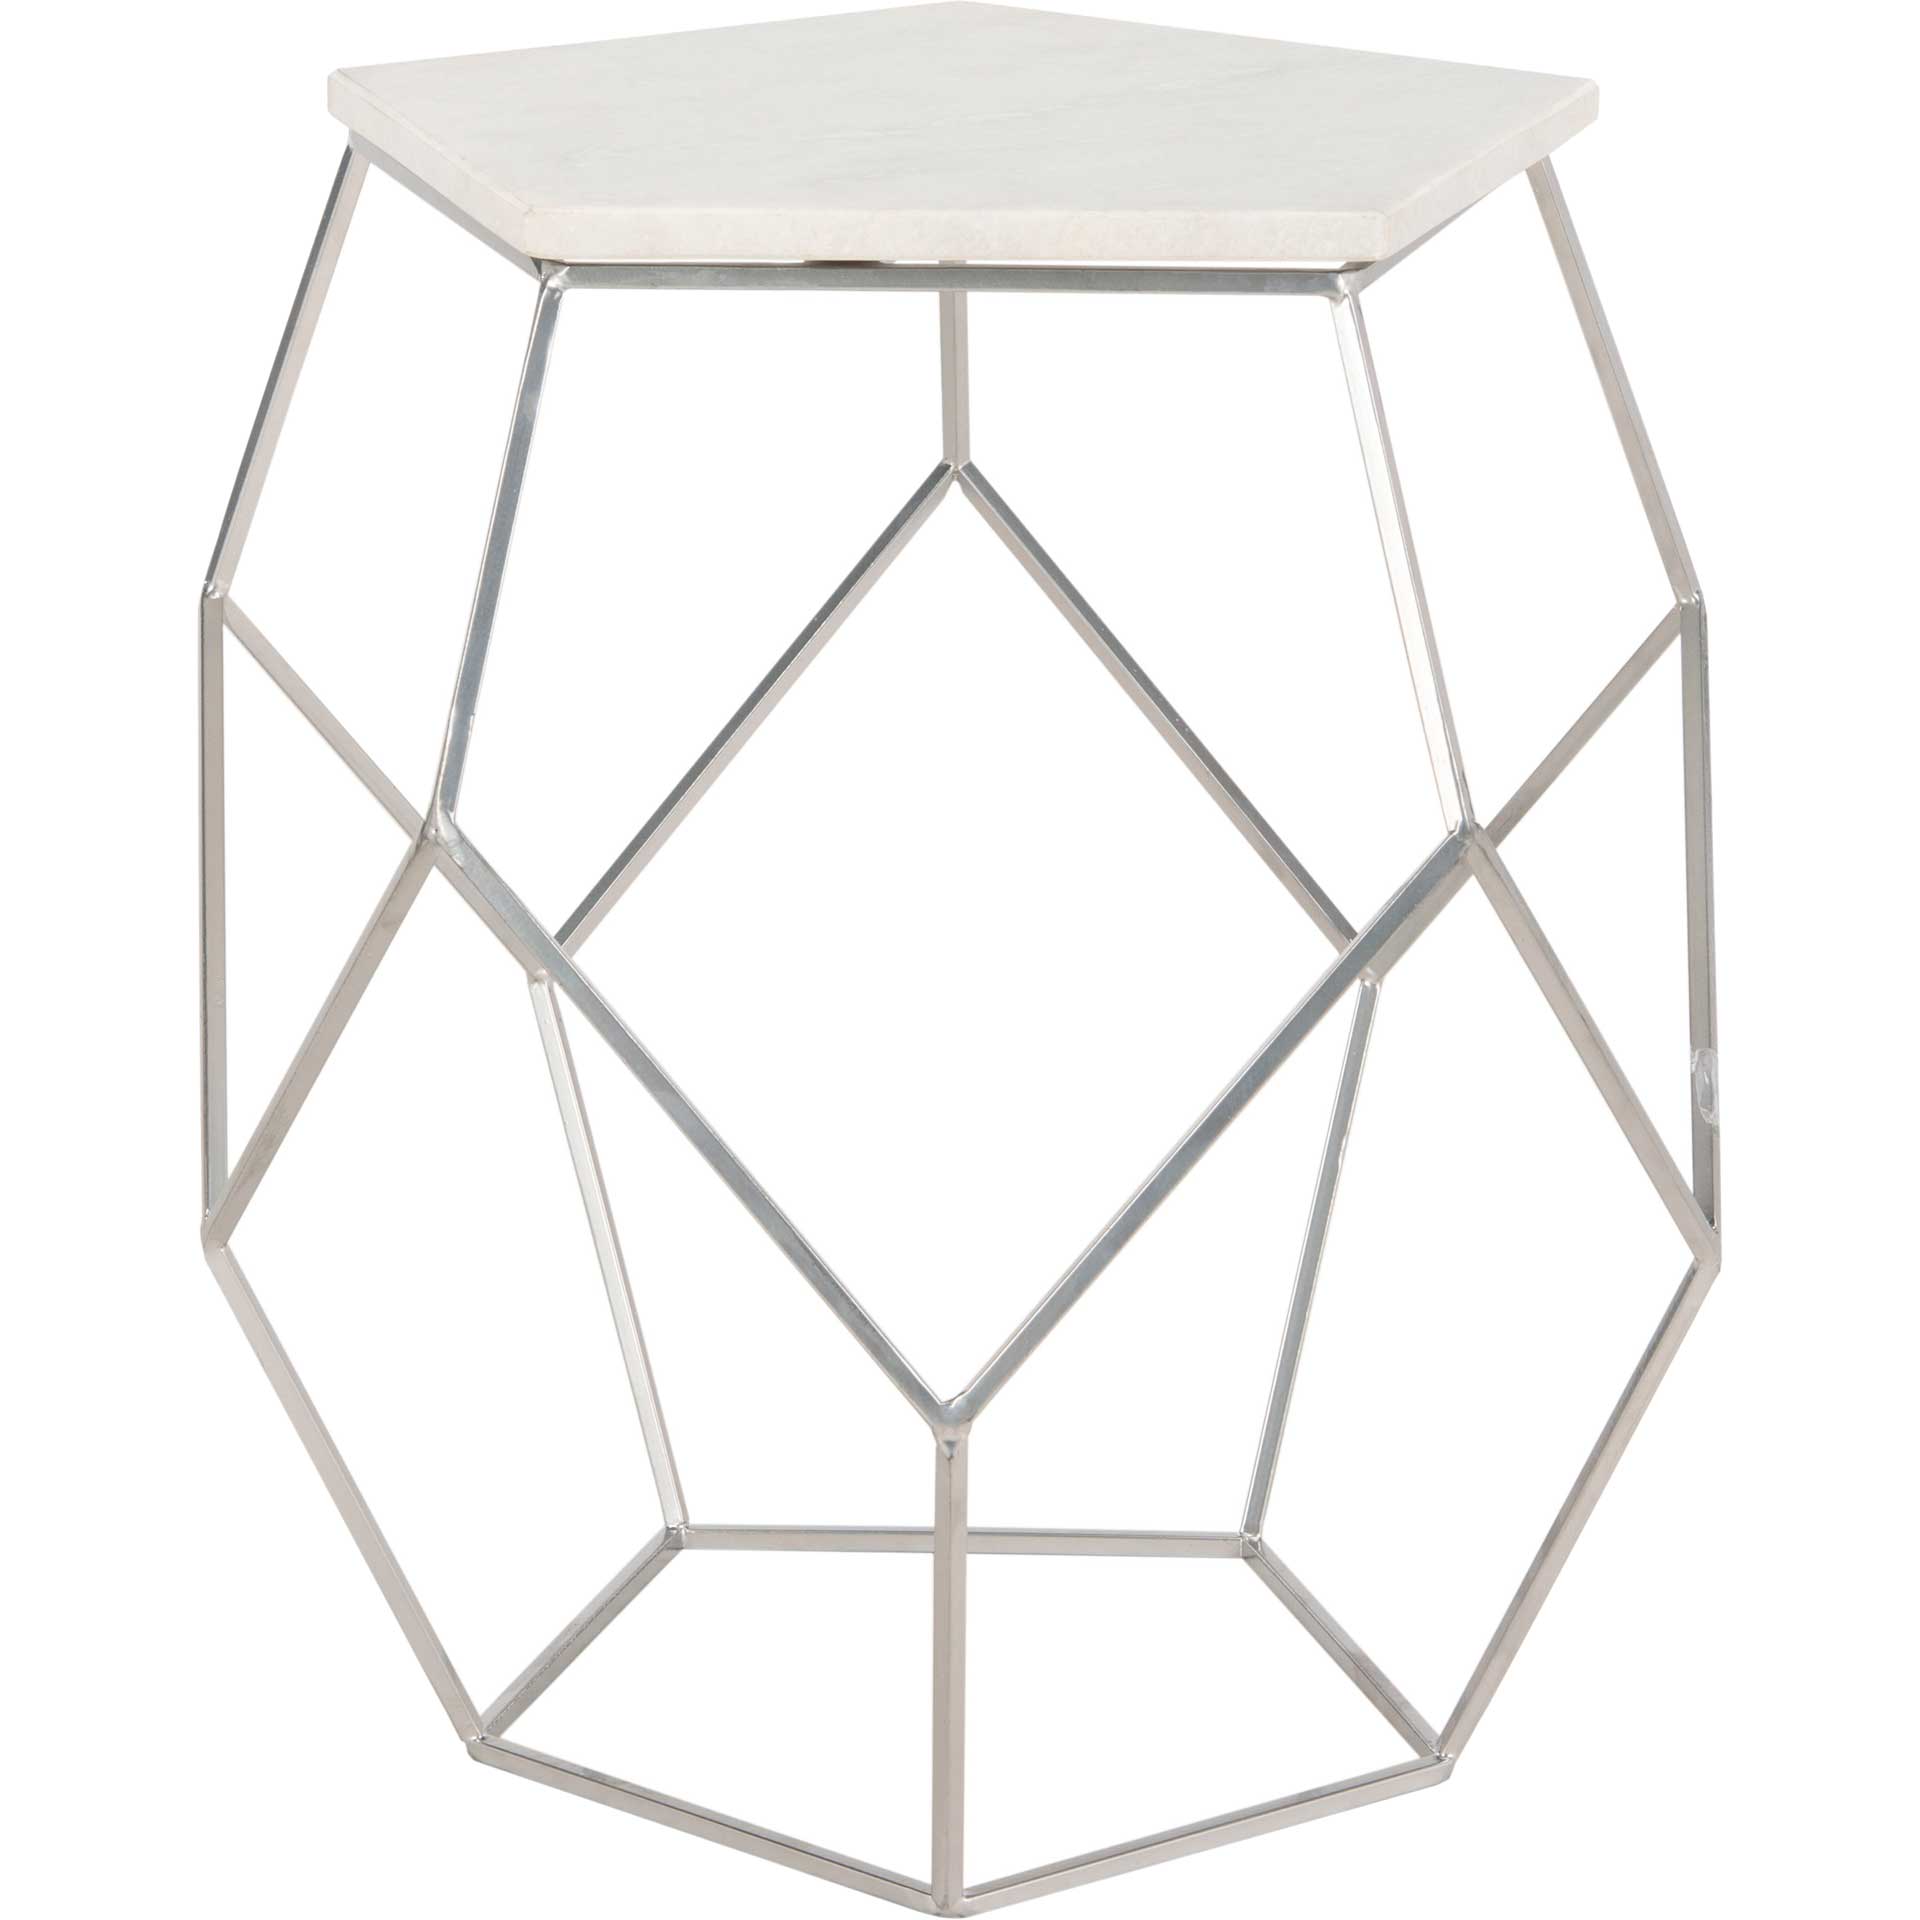 Molly Pentagon Marble Top Side Table Silver/White